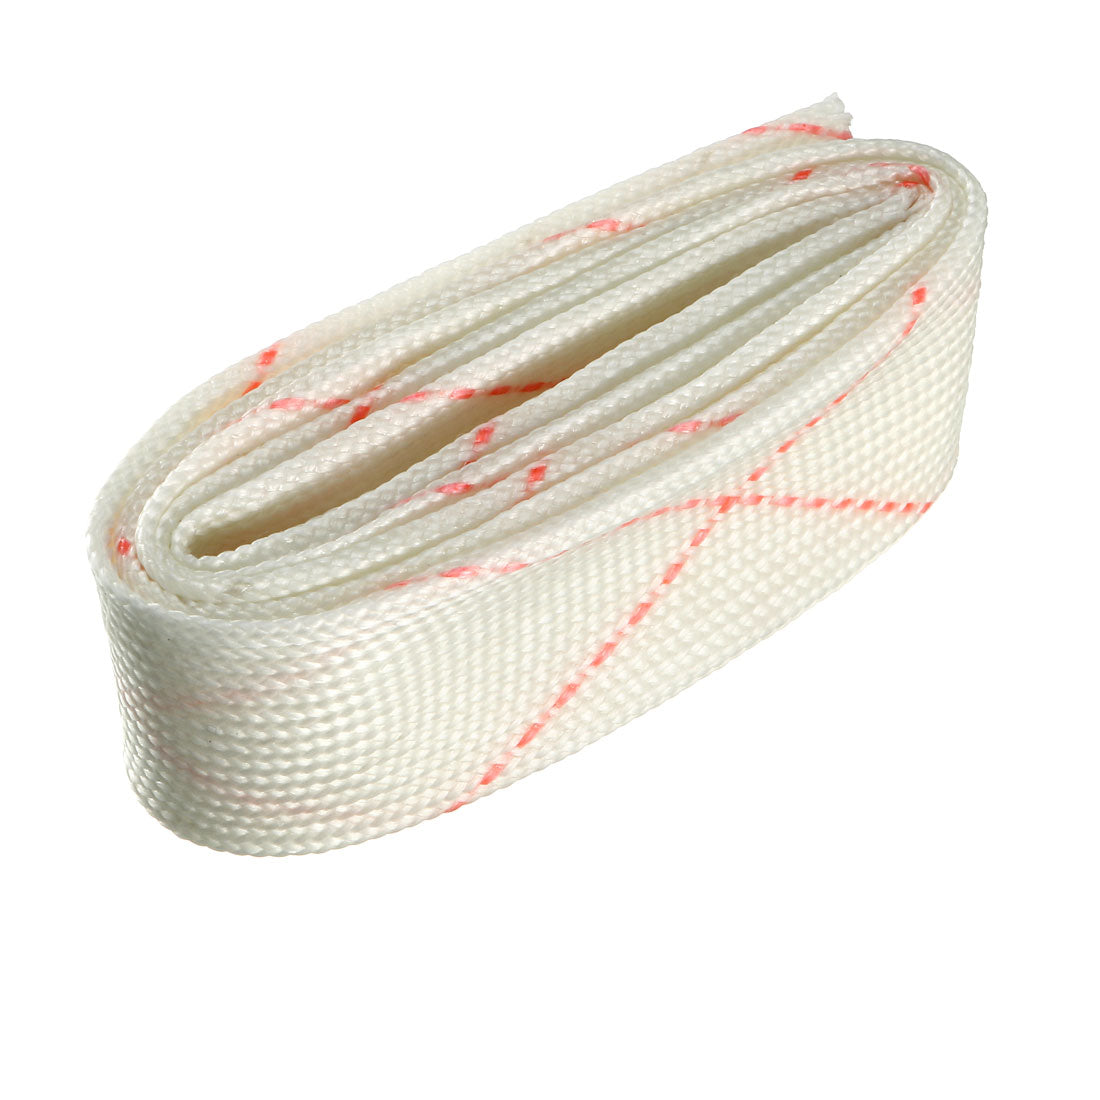 uxcell Uxcell Fiberglass Sleeve 18mm I.D. PVC Insulation Tubing 1500V Tube Adjustable Sleeving Pipe 125 Degree Centigrade Cable Wrap Wire 880mm 2.89ft White and Red